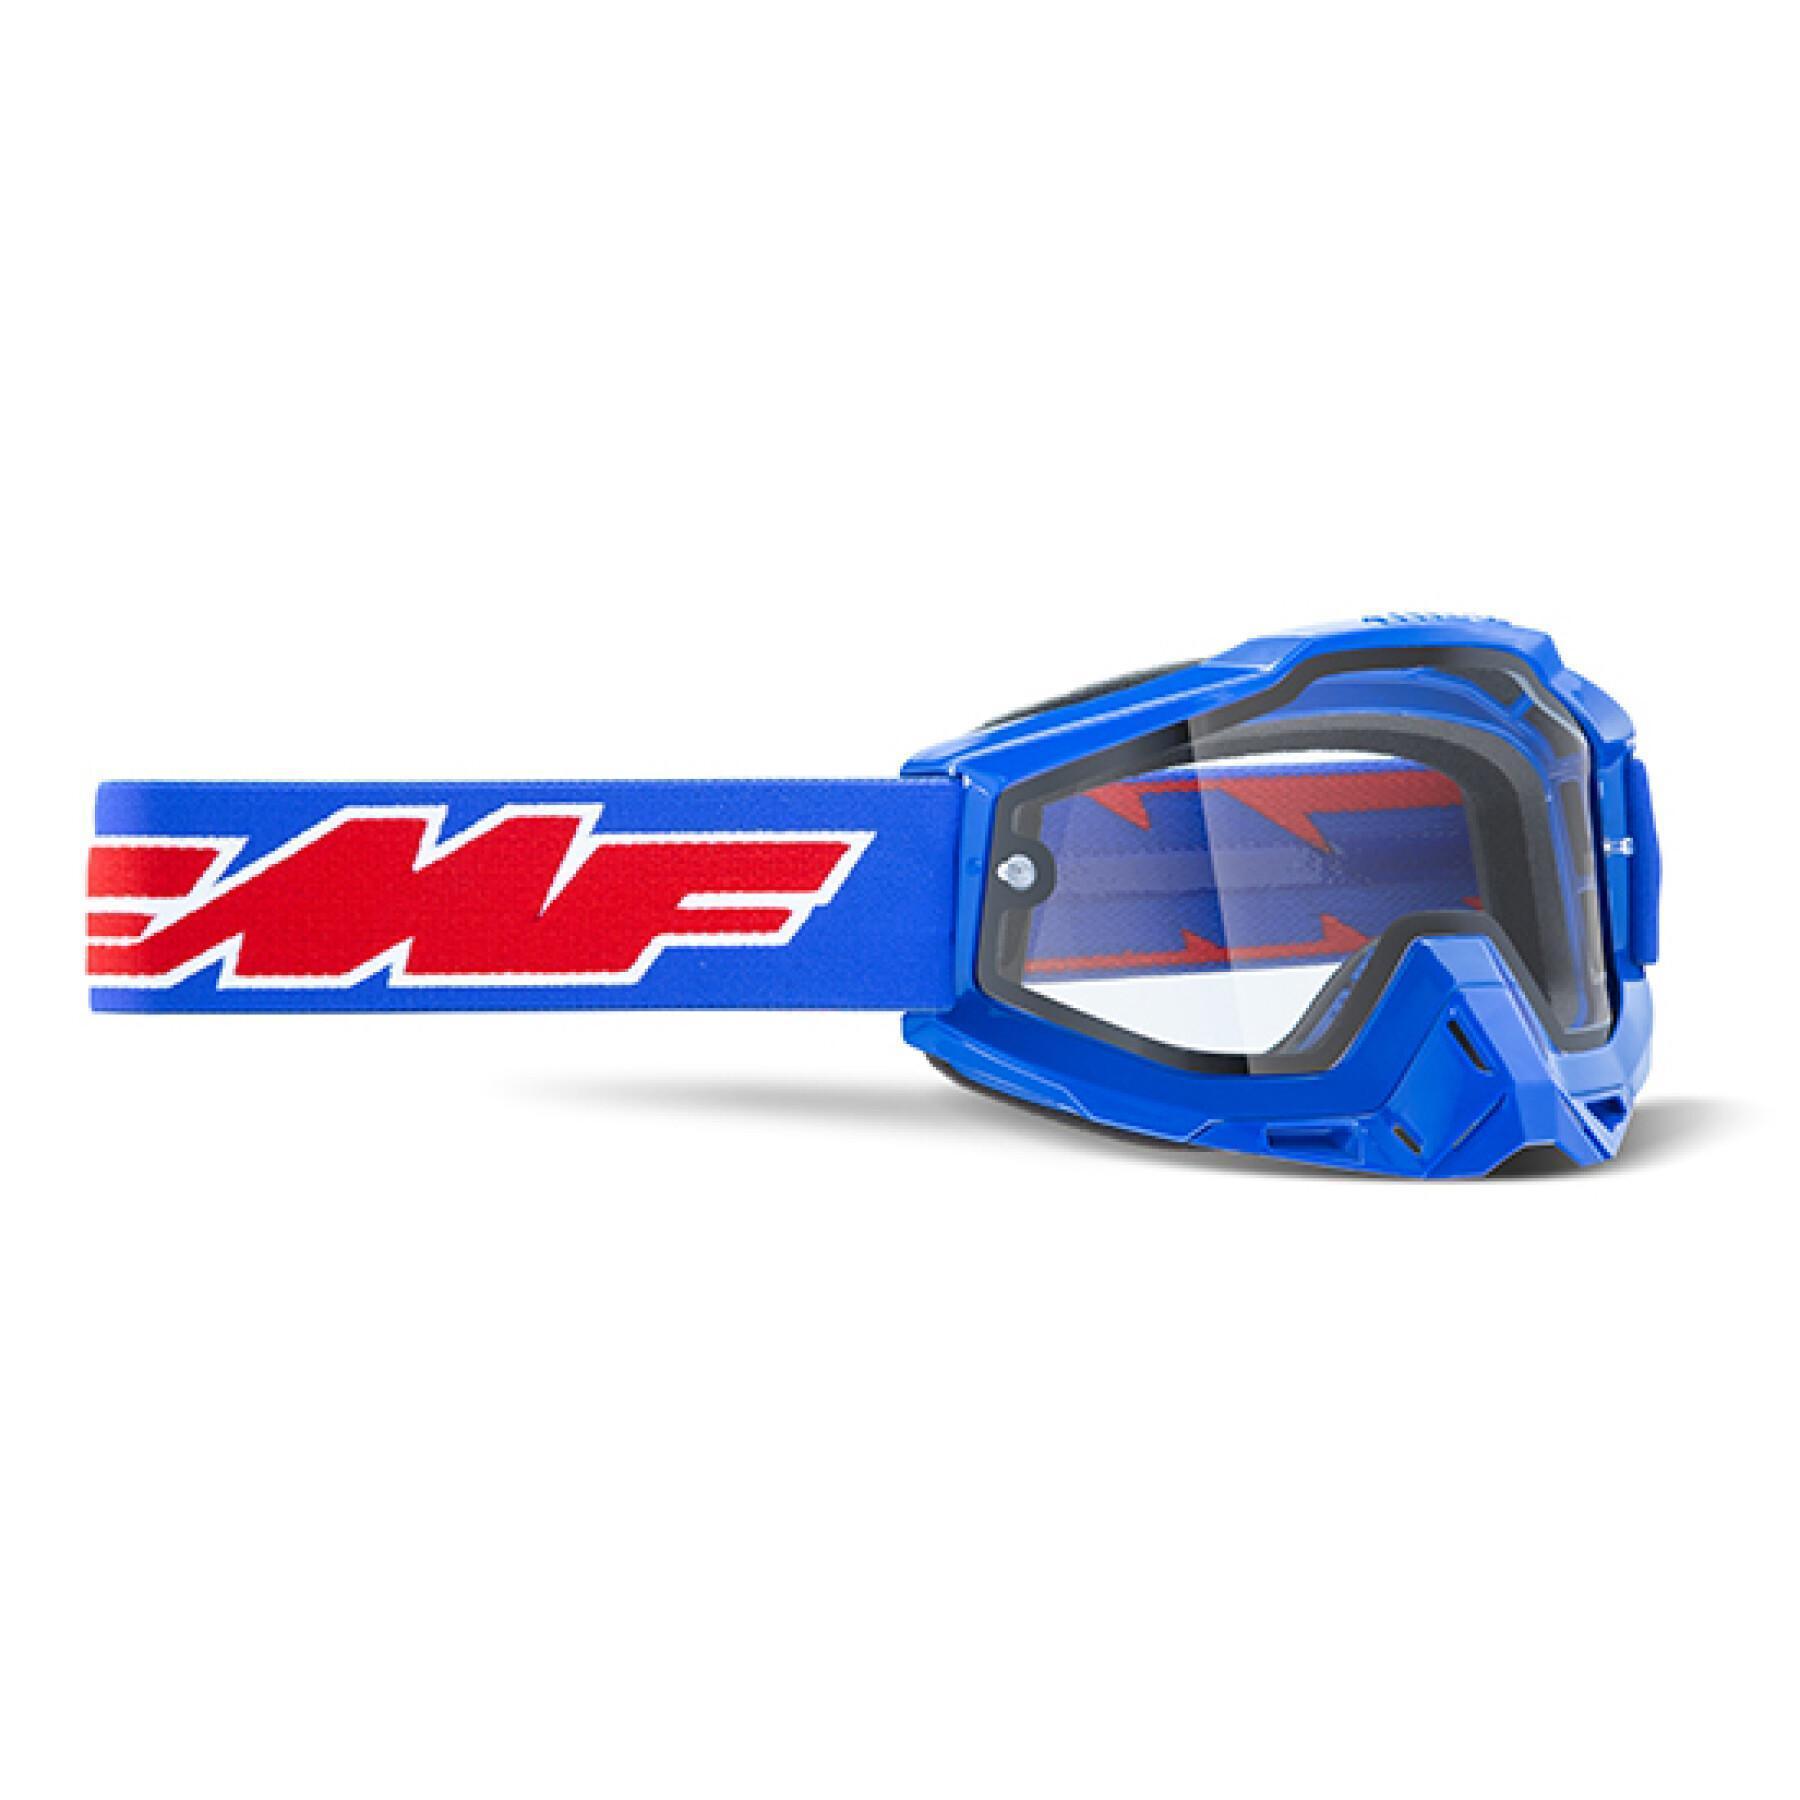 Motorcycle cross mask clear lens FMF Vision Powerbomb Enduro Rocket